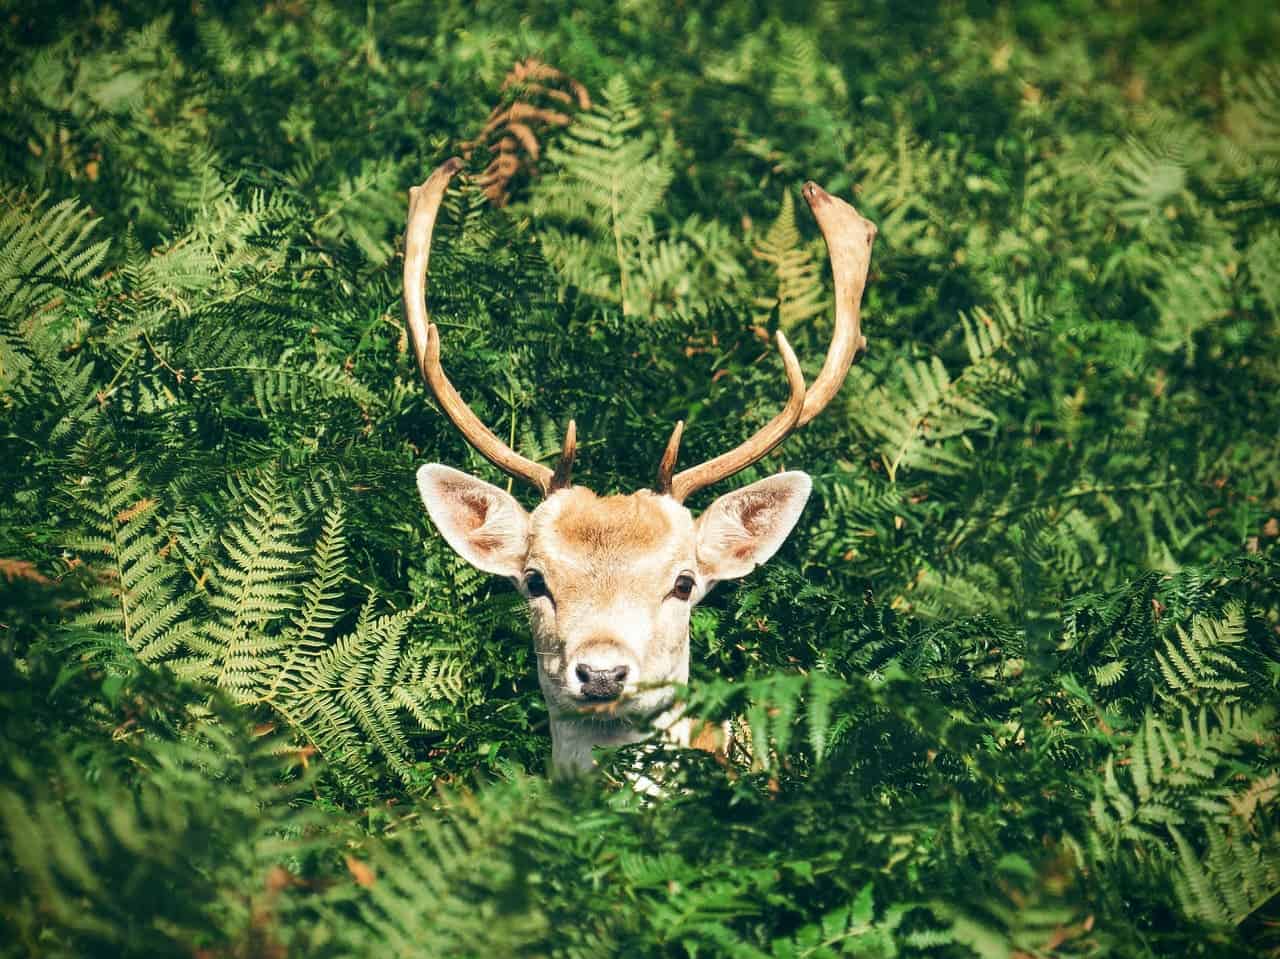 What makes the deer and ferns different? Image credits: Max Pixel.